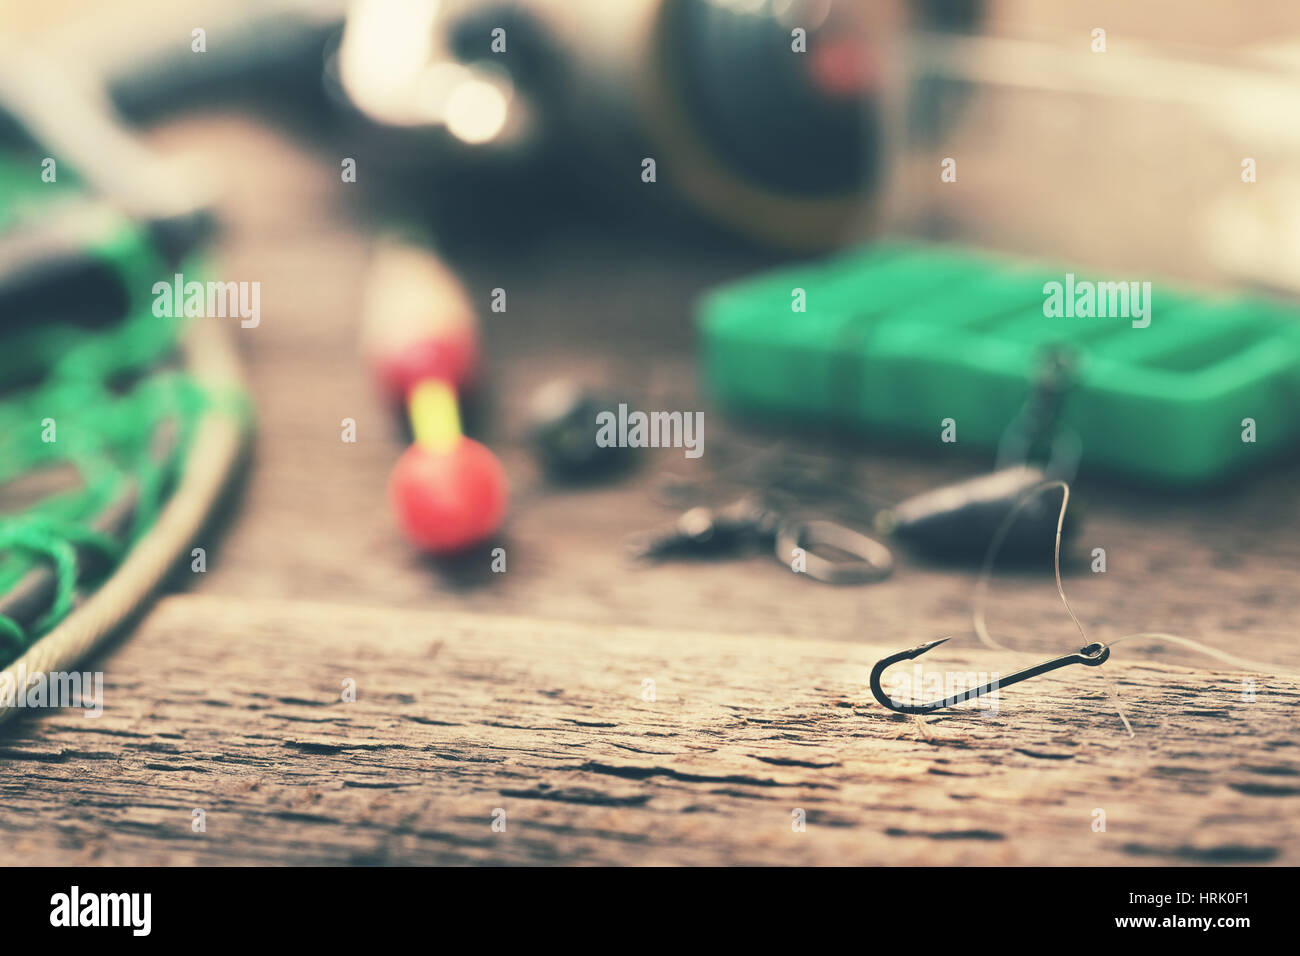 https://c8.alamy.com/comp/HRK0F1/fishing-hook-and-other-equipment-on-old-table-HRK0F1.jpg